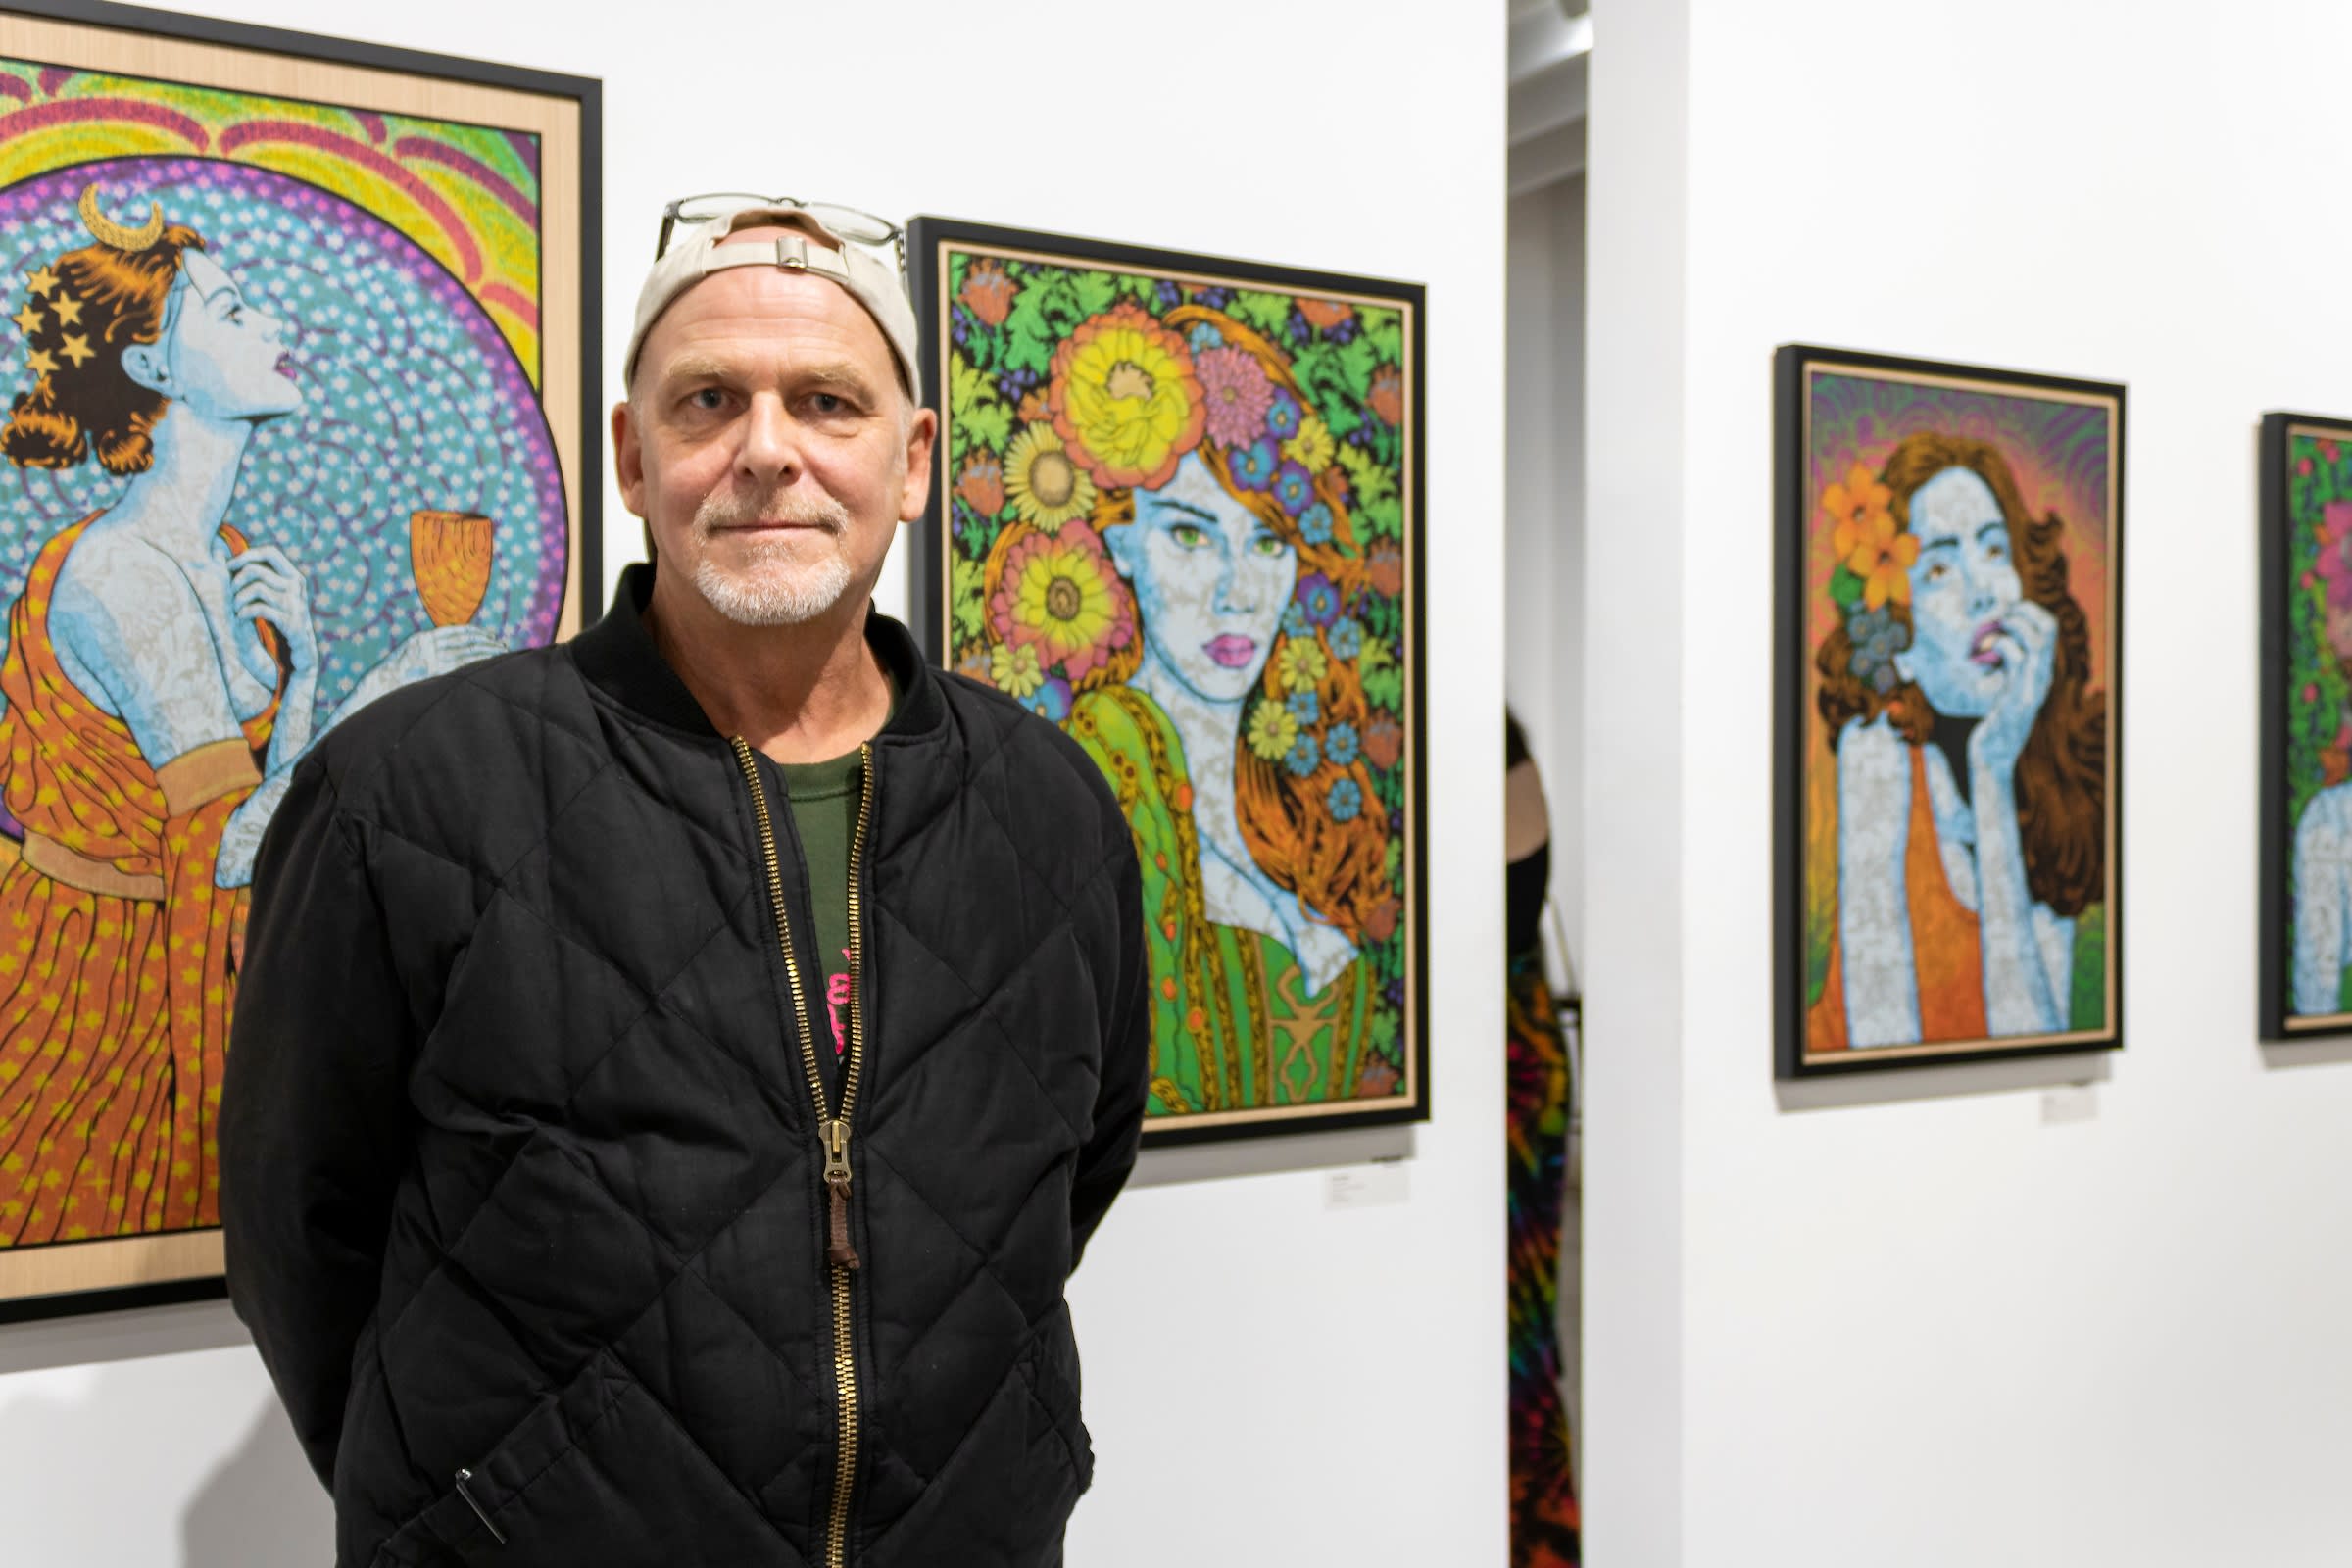 Artist Chuck Sperry standing in front of his artwork.